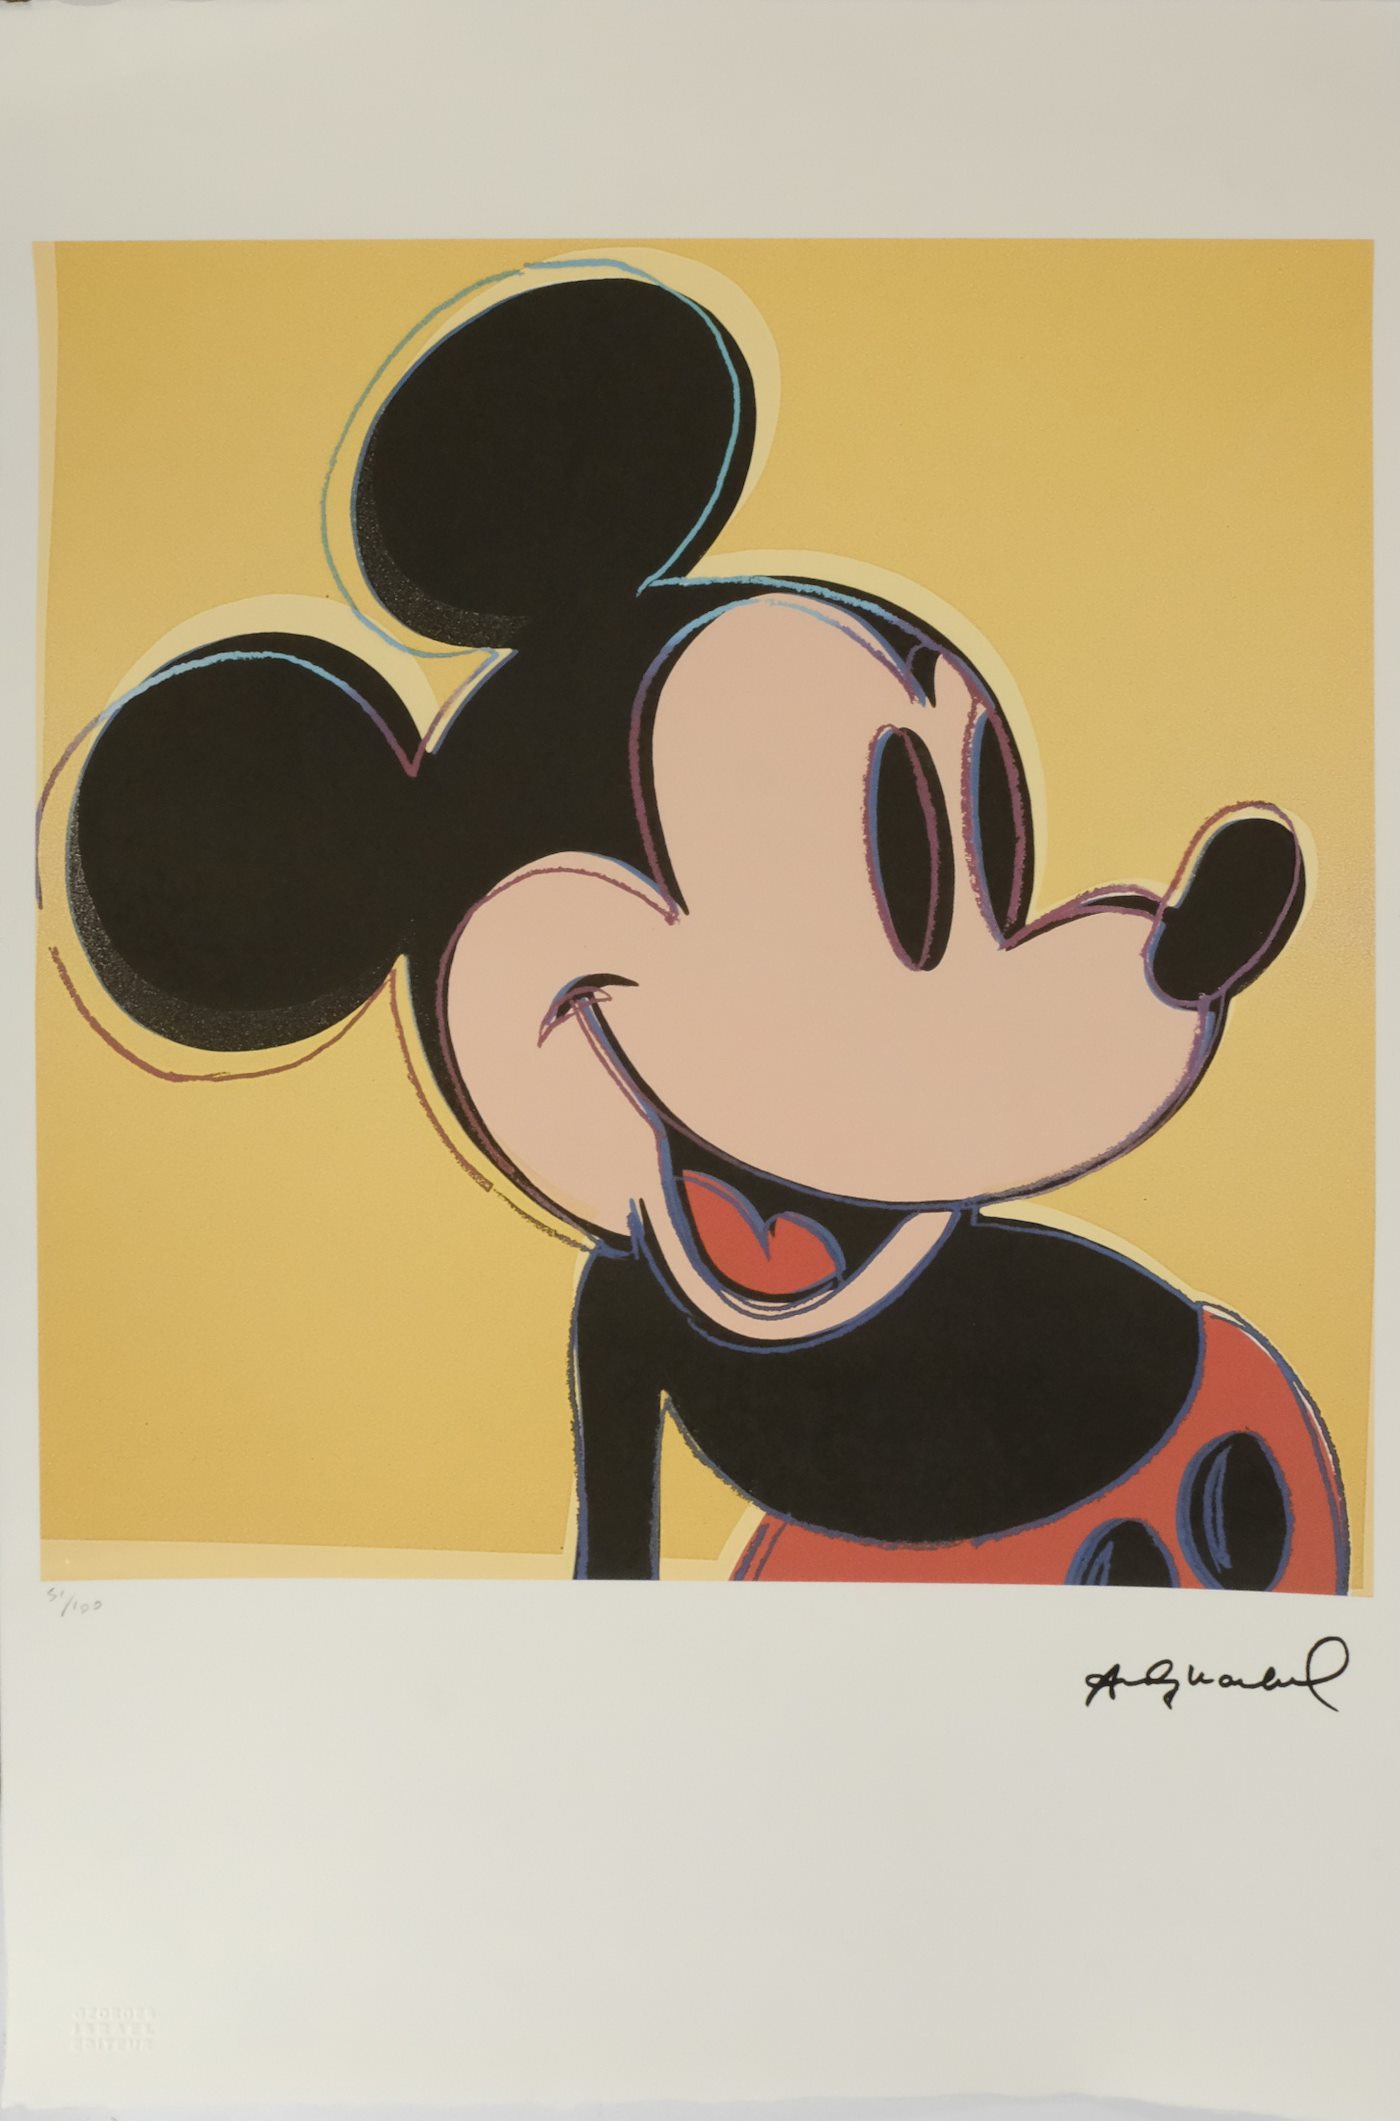 Andy Warhol - Mickey Mouse